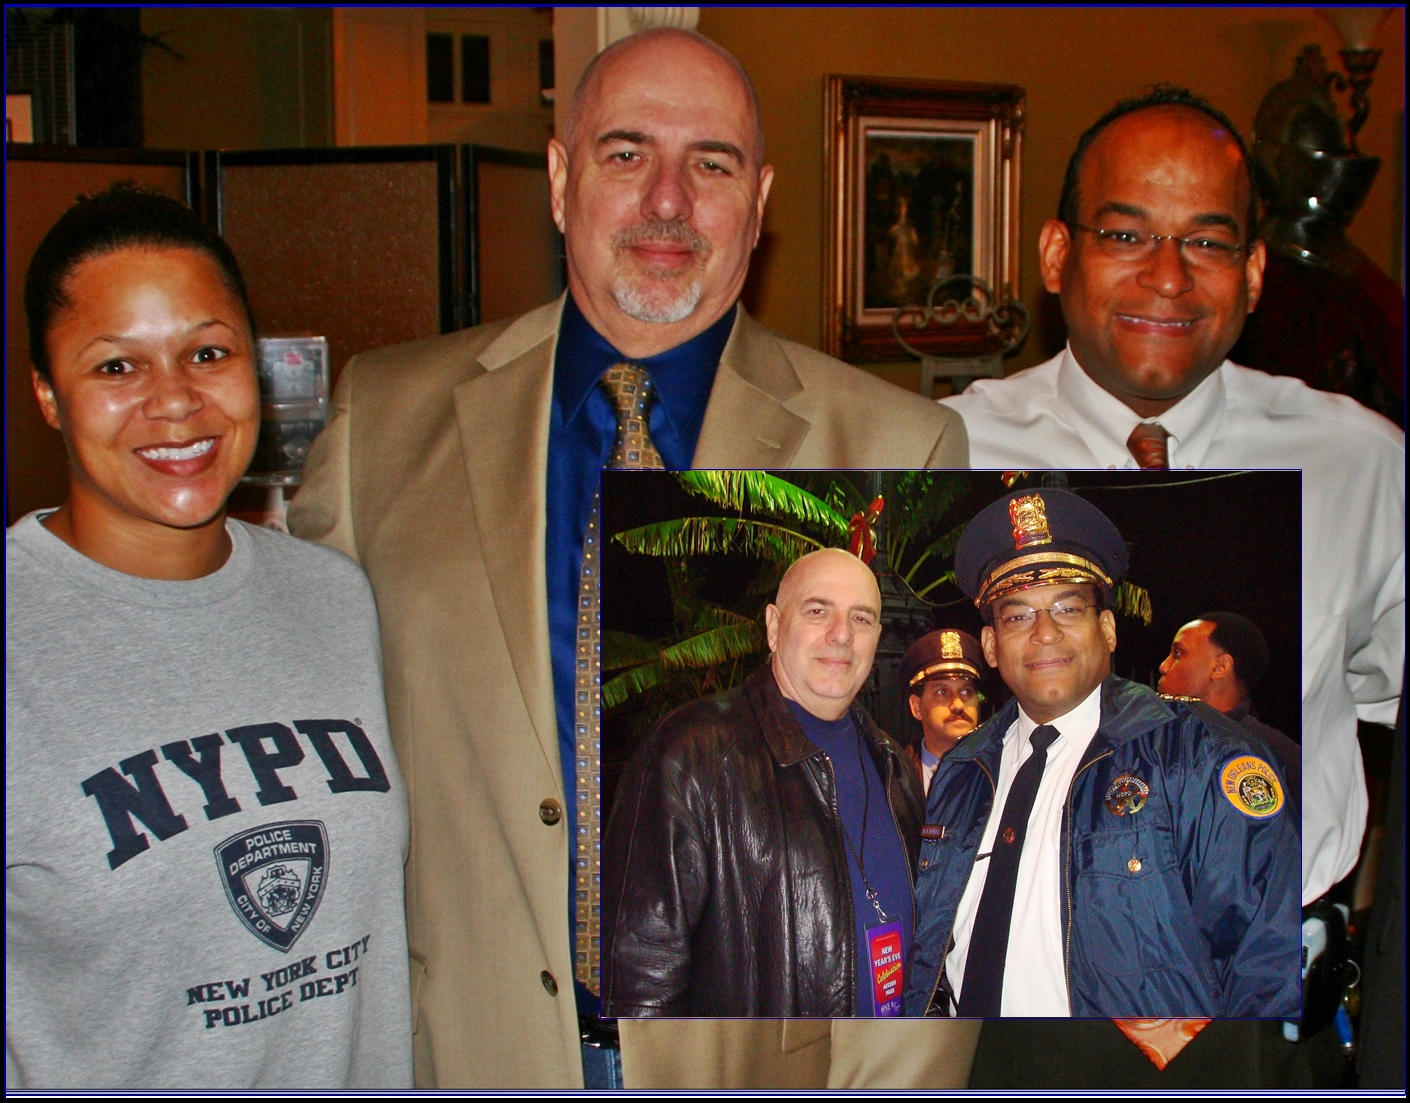 Larry Montz with fmr NOPD Deputy Supt. Marlon Defillo at the Pre-Grand Opening of Montz' PARAPLEX (Jan. 2009) and backstage at the Mayor's New Years Eve concert & party (insert photo).